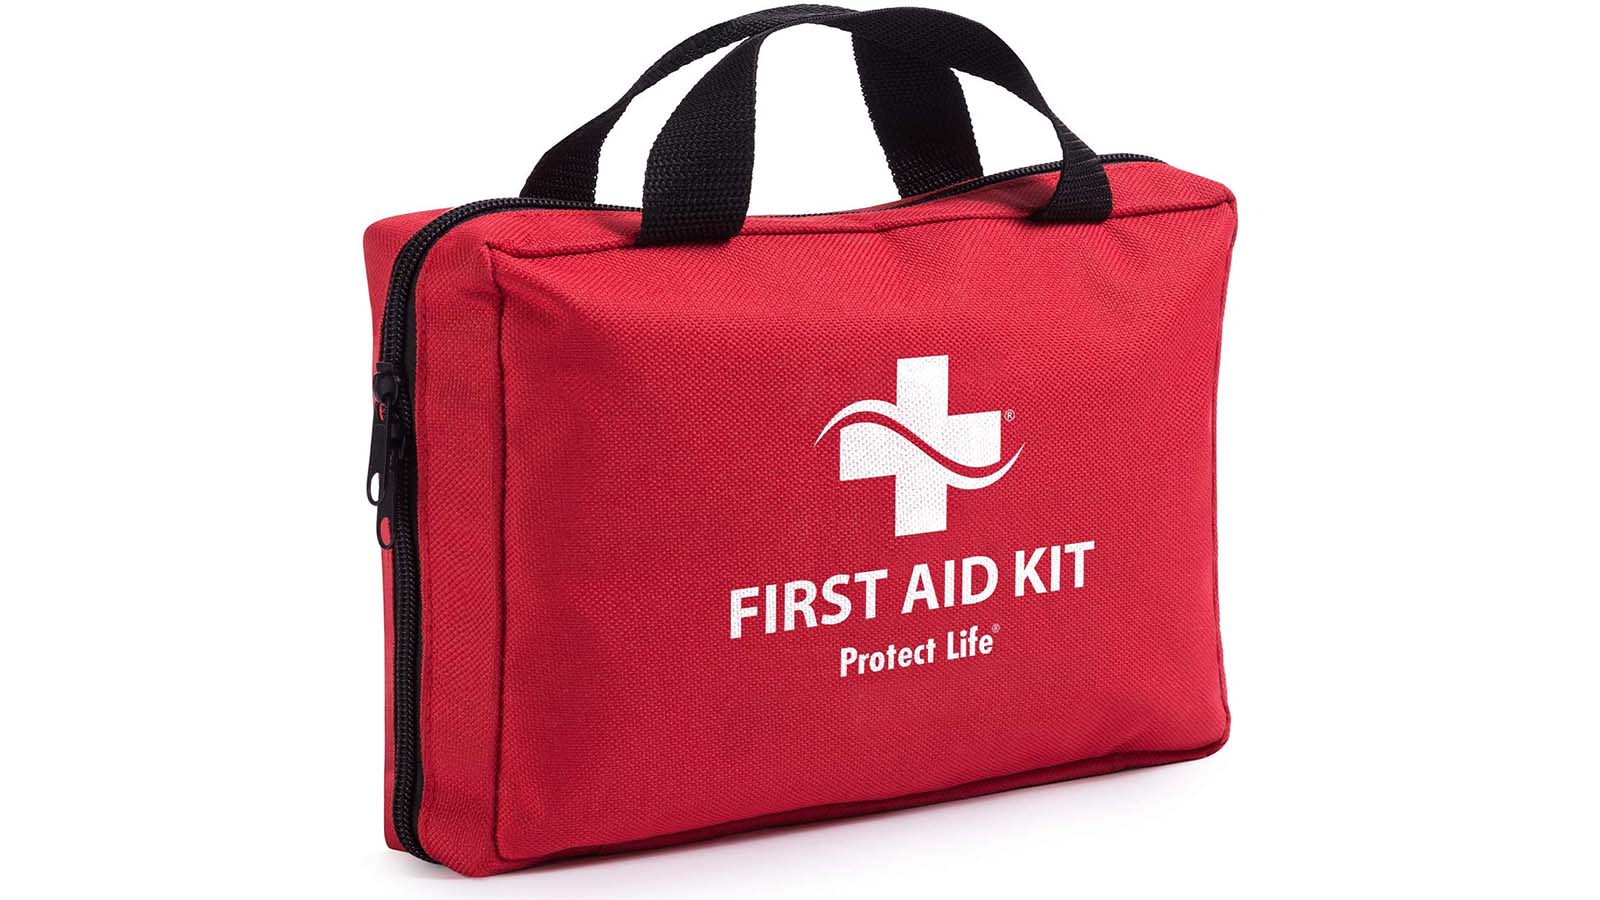 Is to protect life. Aid Kit. Home first Aid Kit. Protect Life. First Kid Aid купить сумка черная.